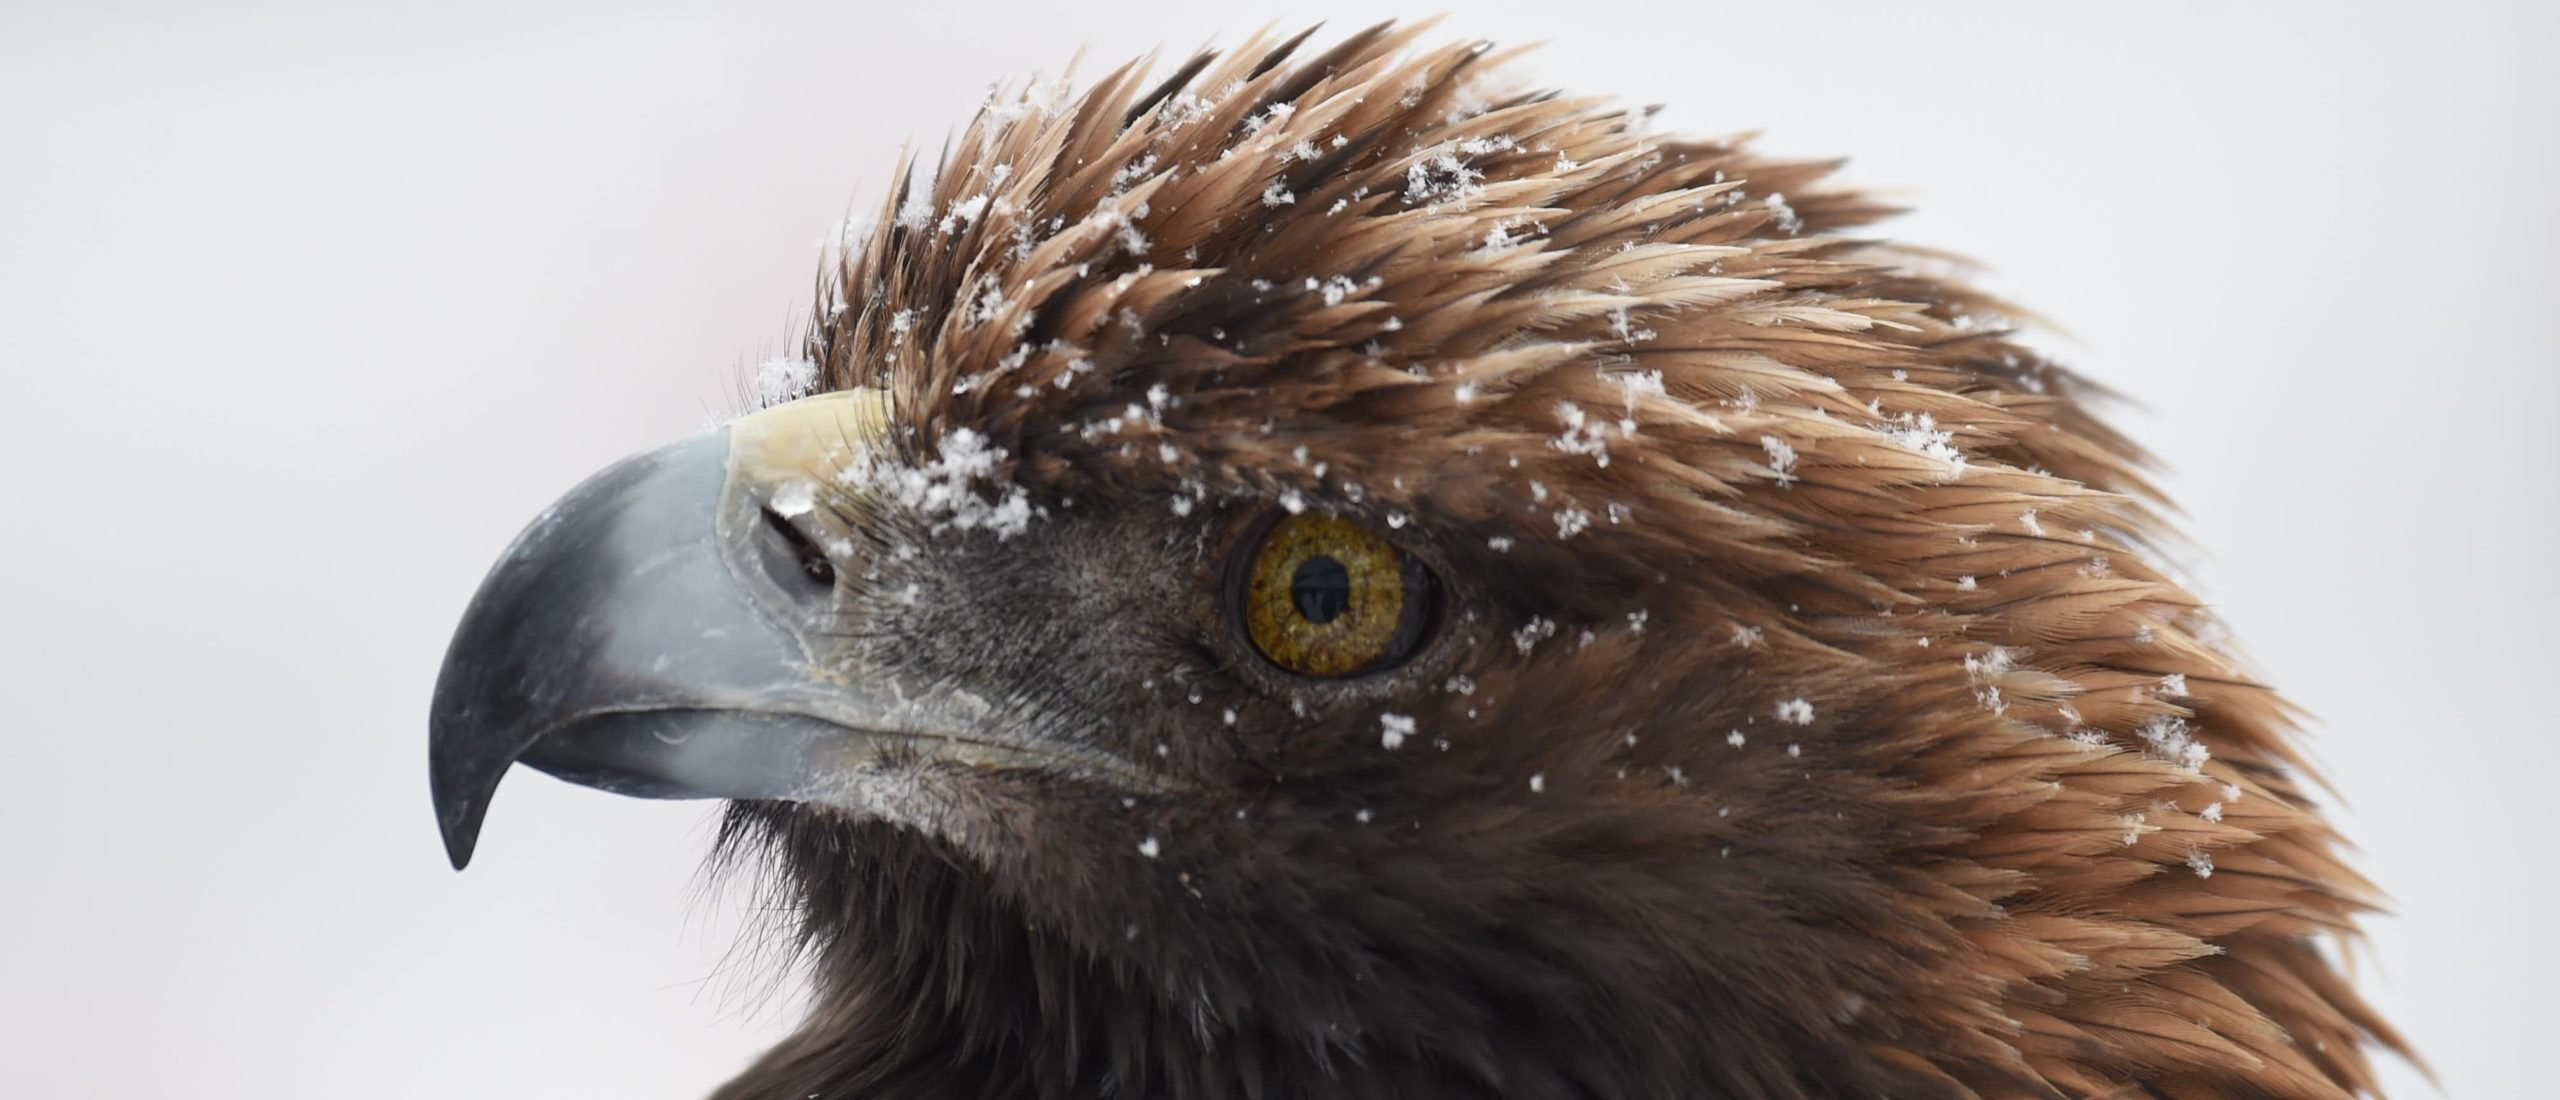 Biden’s Wind Power Push Could Wipe Out Nearly Half Of Golden Eagle Population By 2050: REPORT